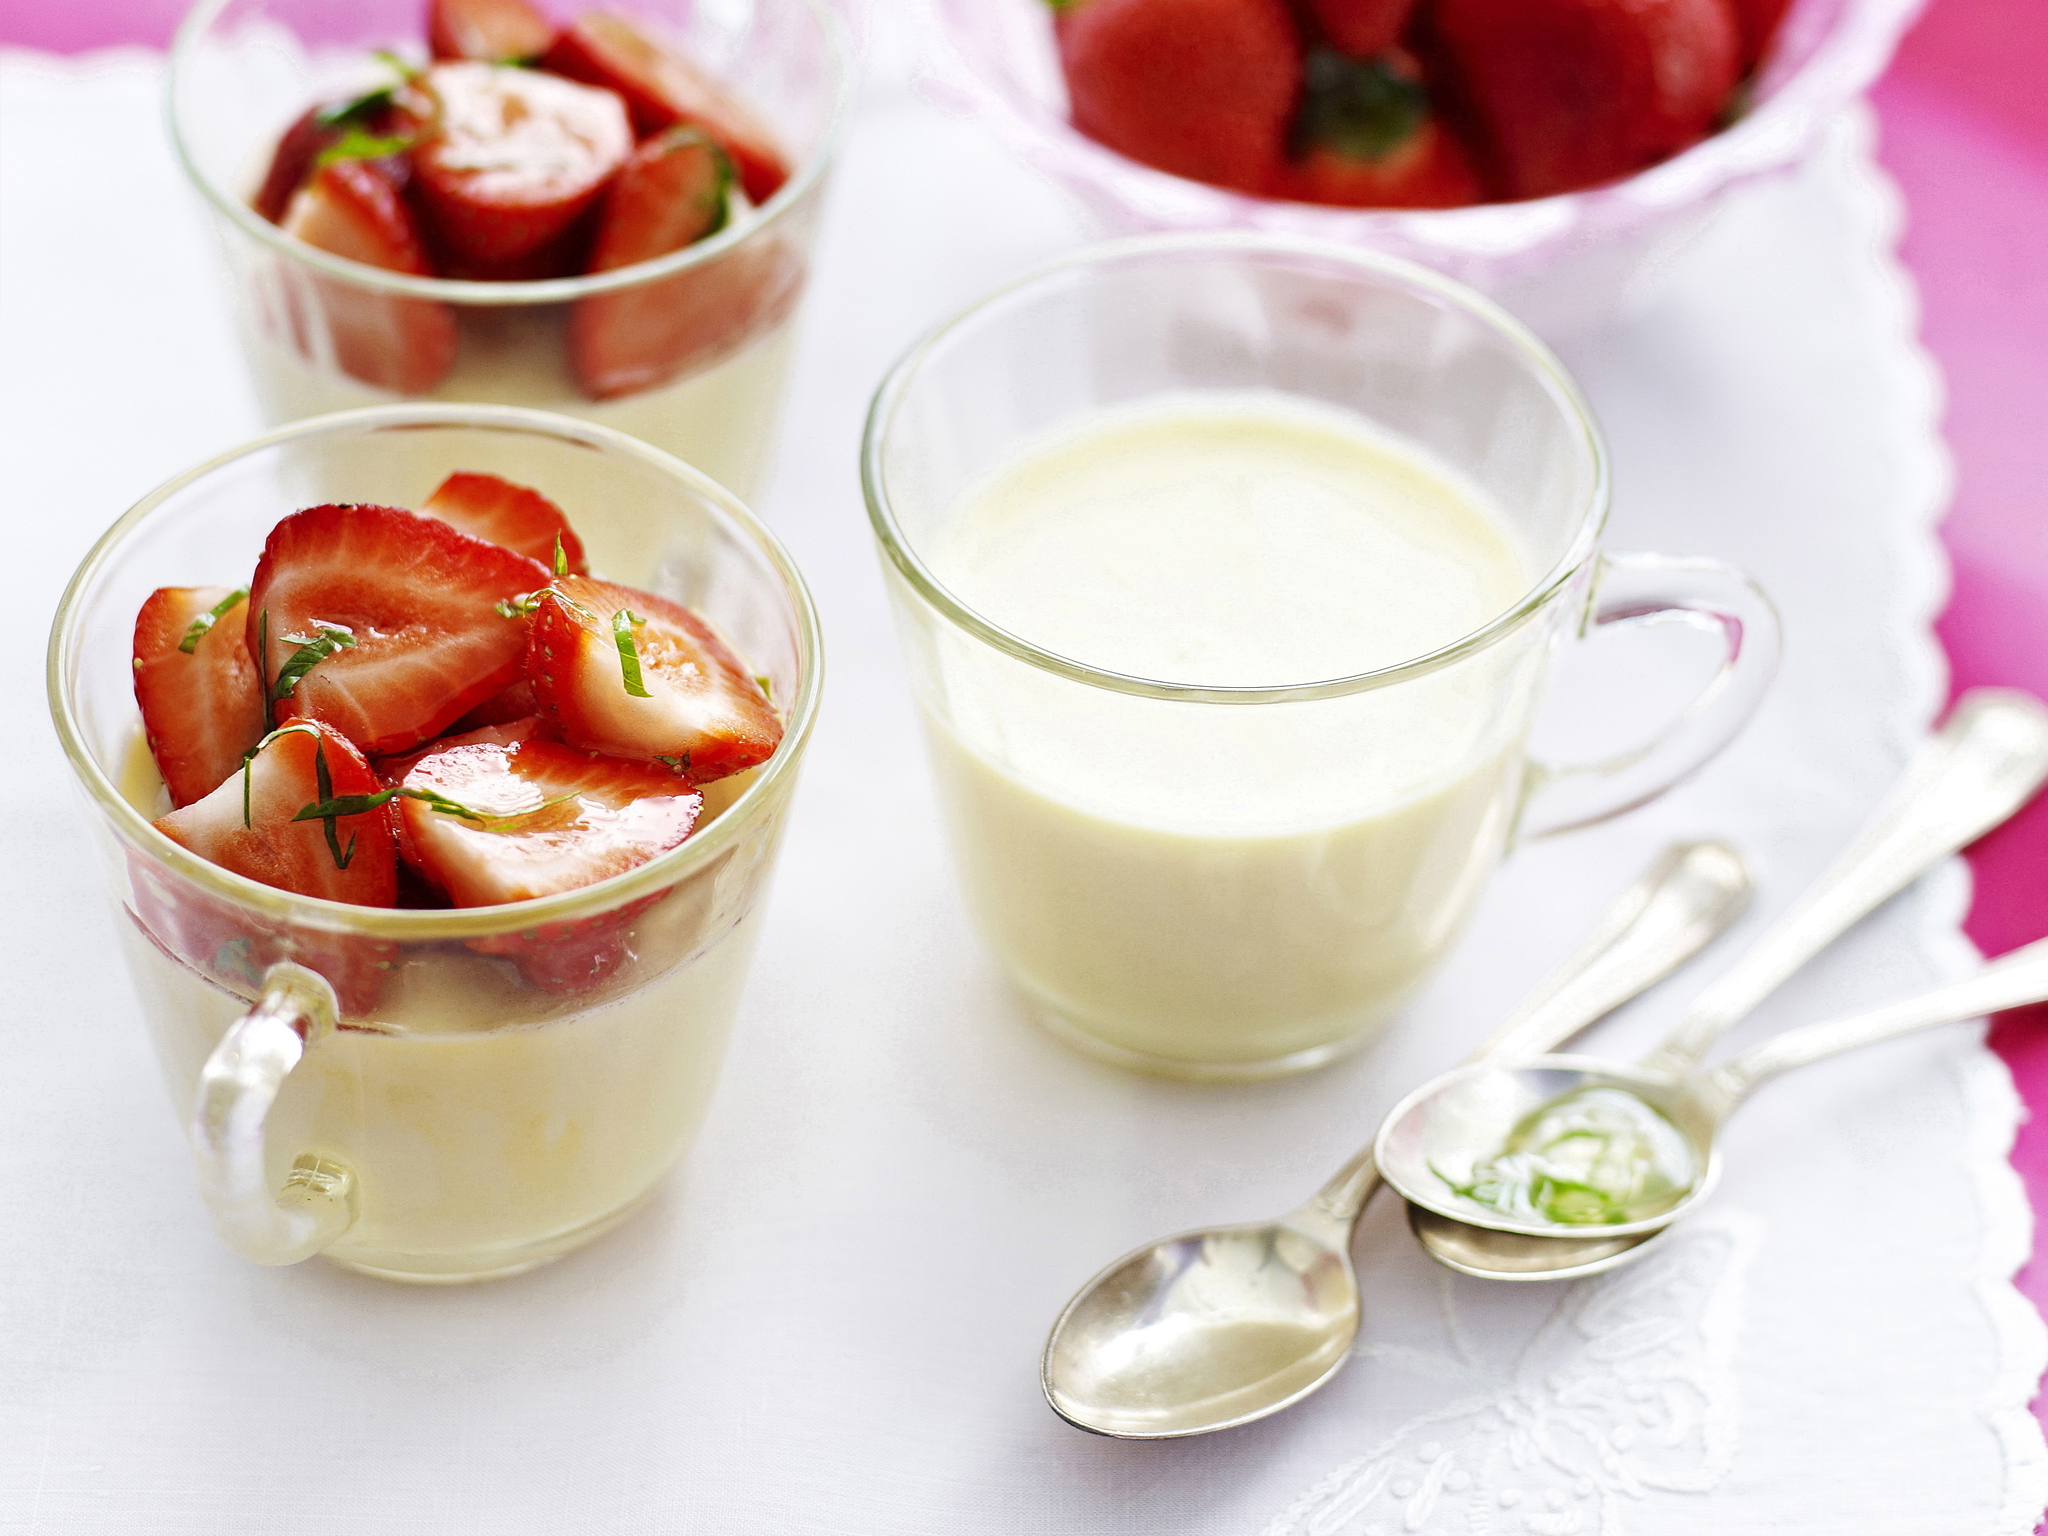 Panna cotta with strawberries with lemon basil syrup